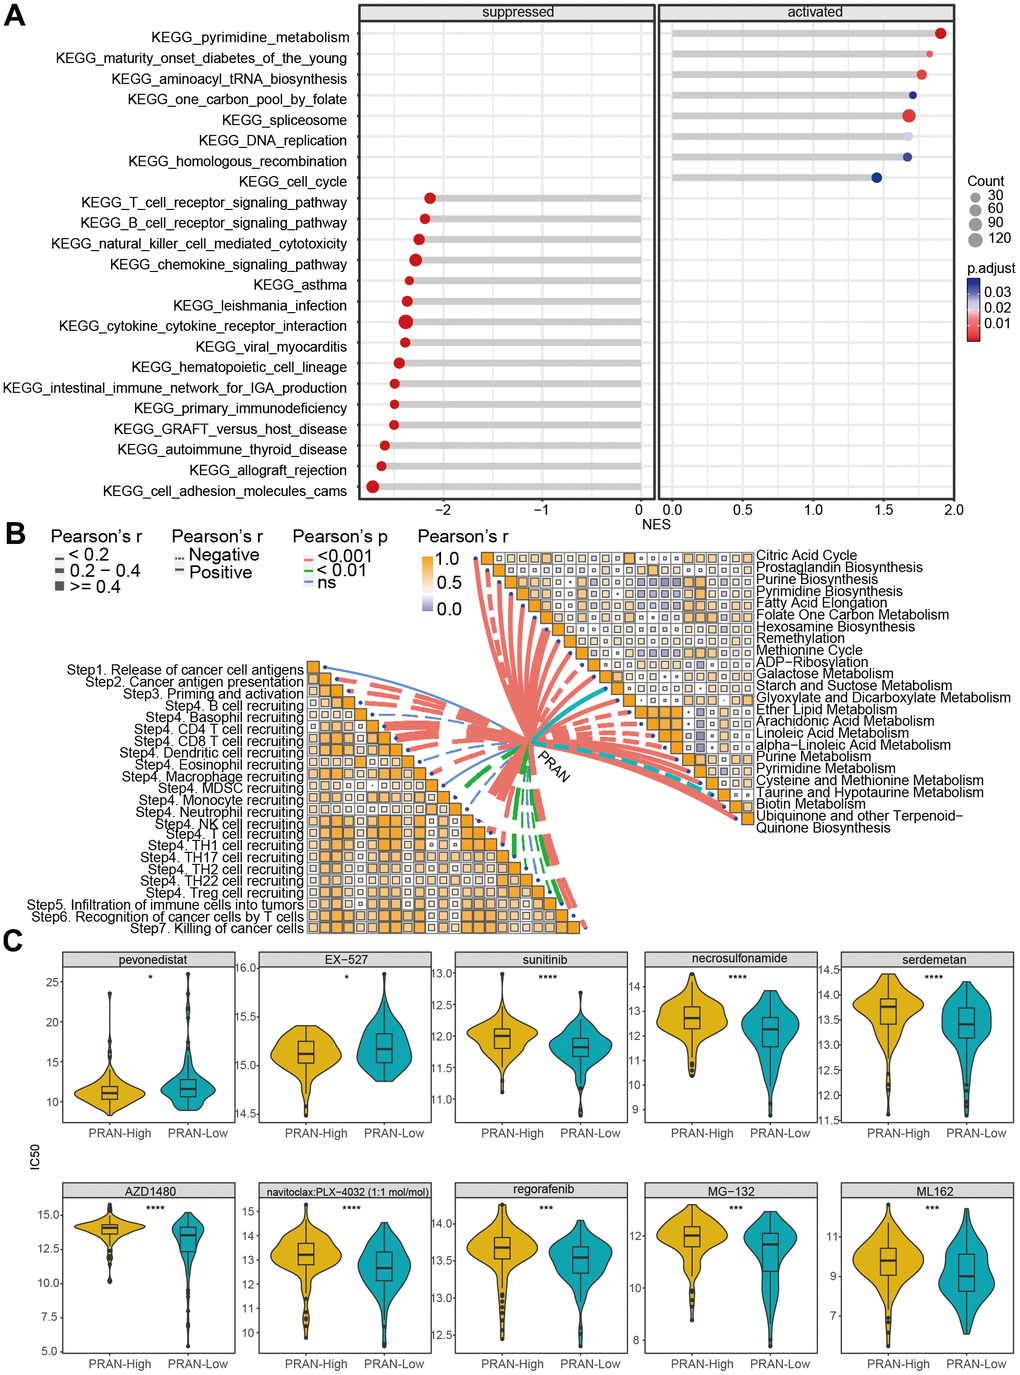 Biological function analysis and drug-susceptibility analysis of PRAN risk model in TCGA-Advanced NSCLC dataset. (A) The lollipop plot displays the top 10 significantly enriched suppressed pathways and all activated pathways in the PRAN-High and PRAN-Low groups. (B) Pearson correlation analysis demonstrates the relationship between PCD scores and cancer immune cycle activity (left) and metabolism-related pathways (right). (C) Sensitivity analysis of anti-tumor drugs between PRAN-High and PRAN-Low groups. P-value: ns >=0.05; * 